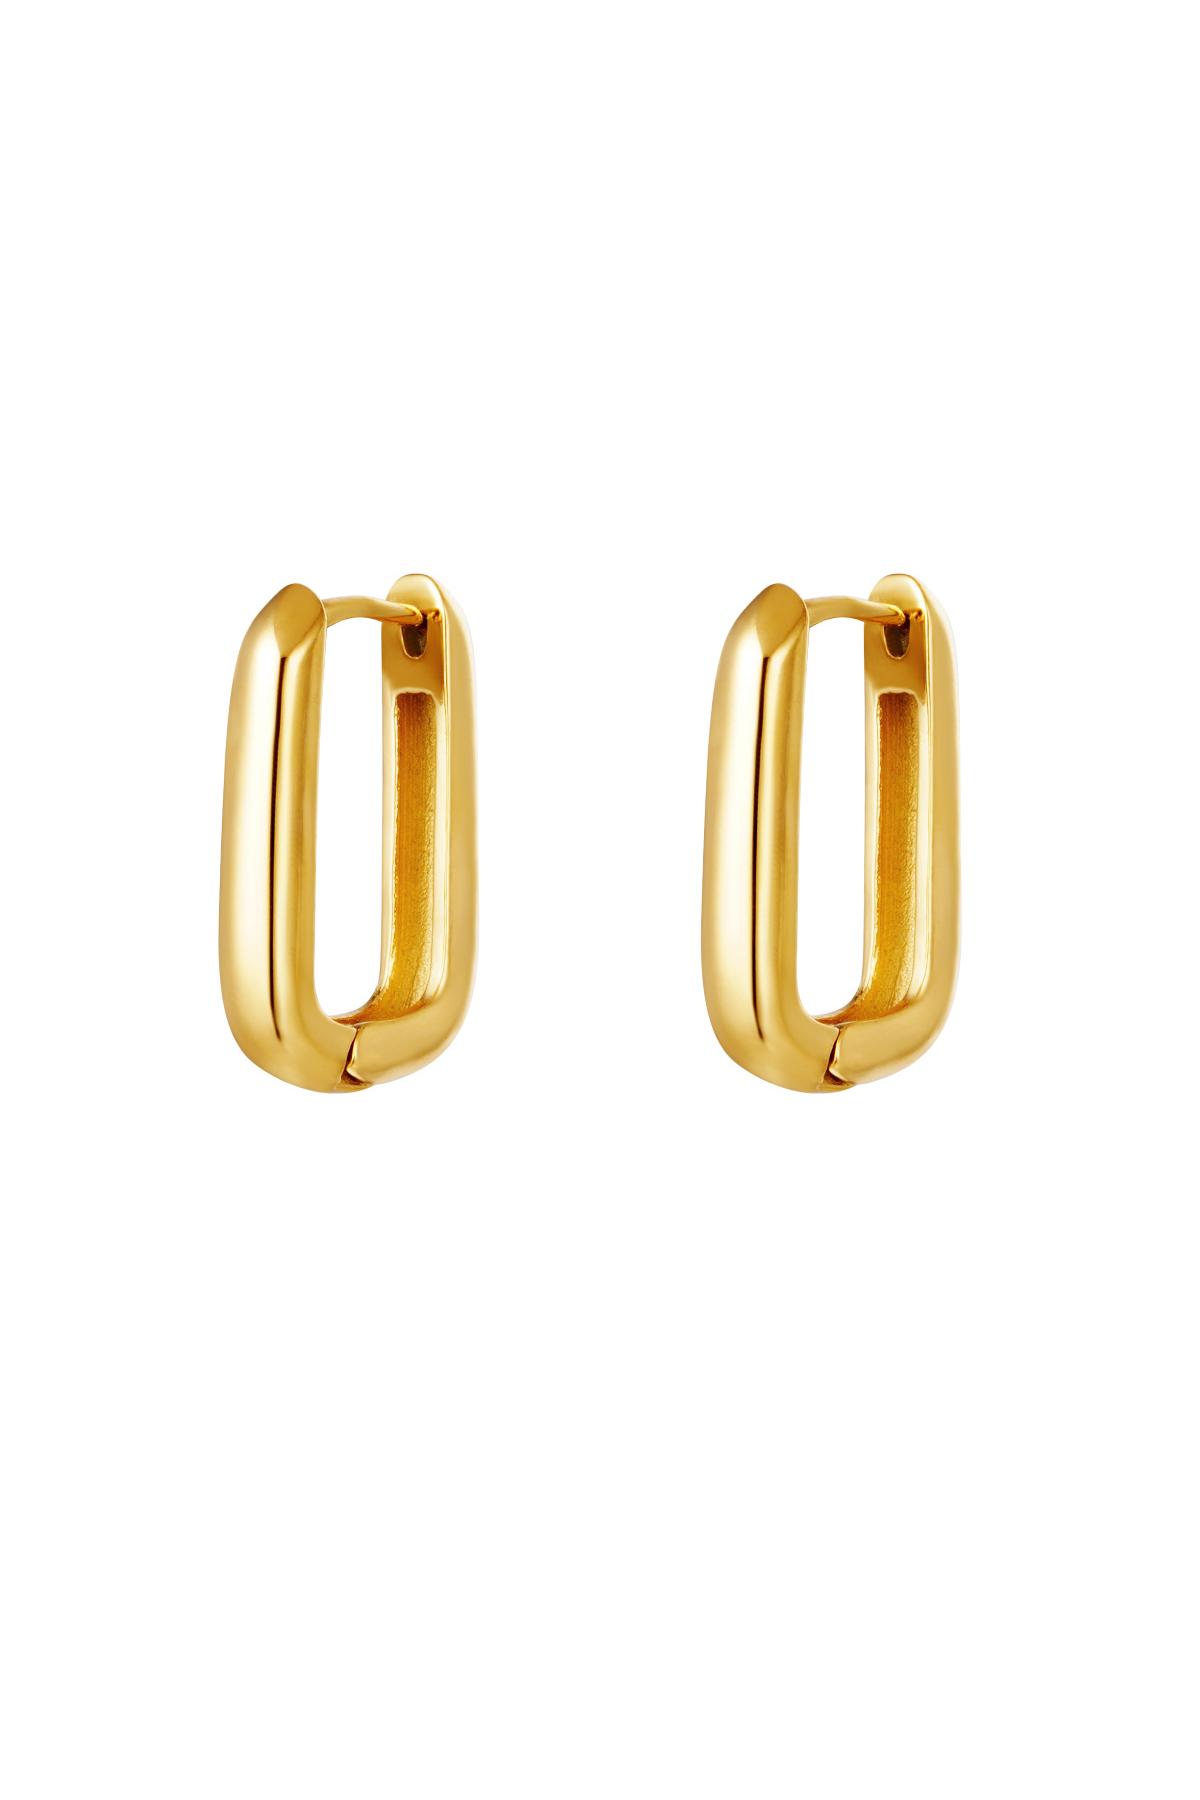 Gold / Earrings square large Gold Stainless Steel 